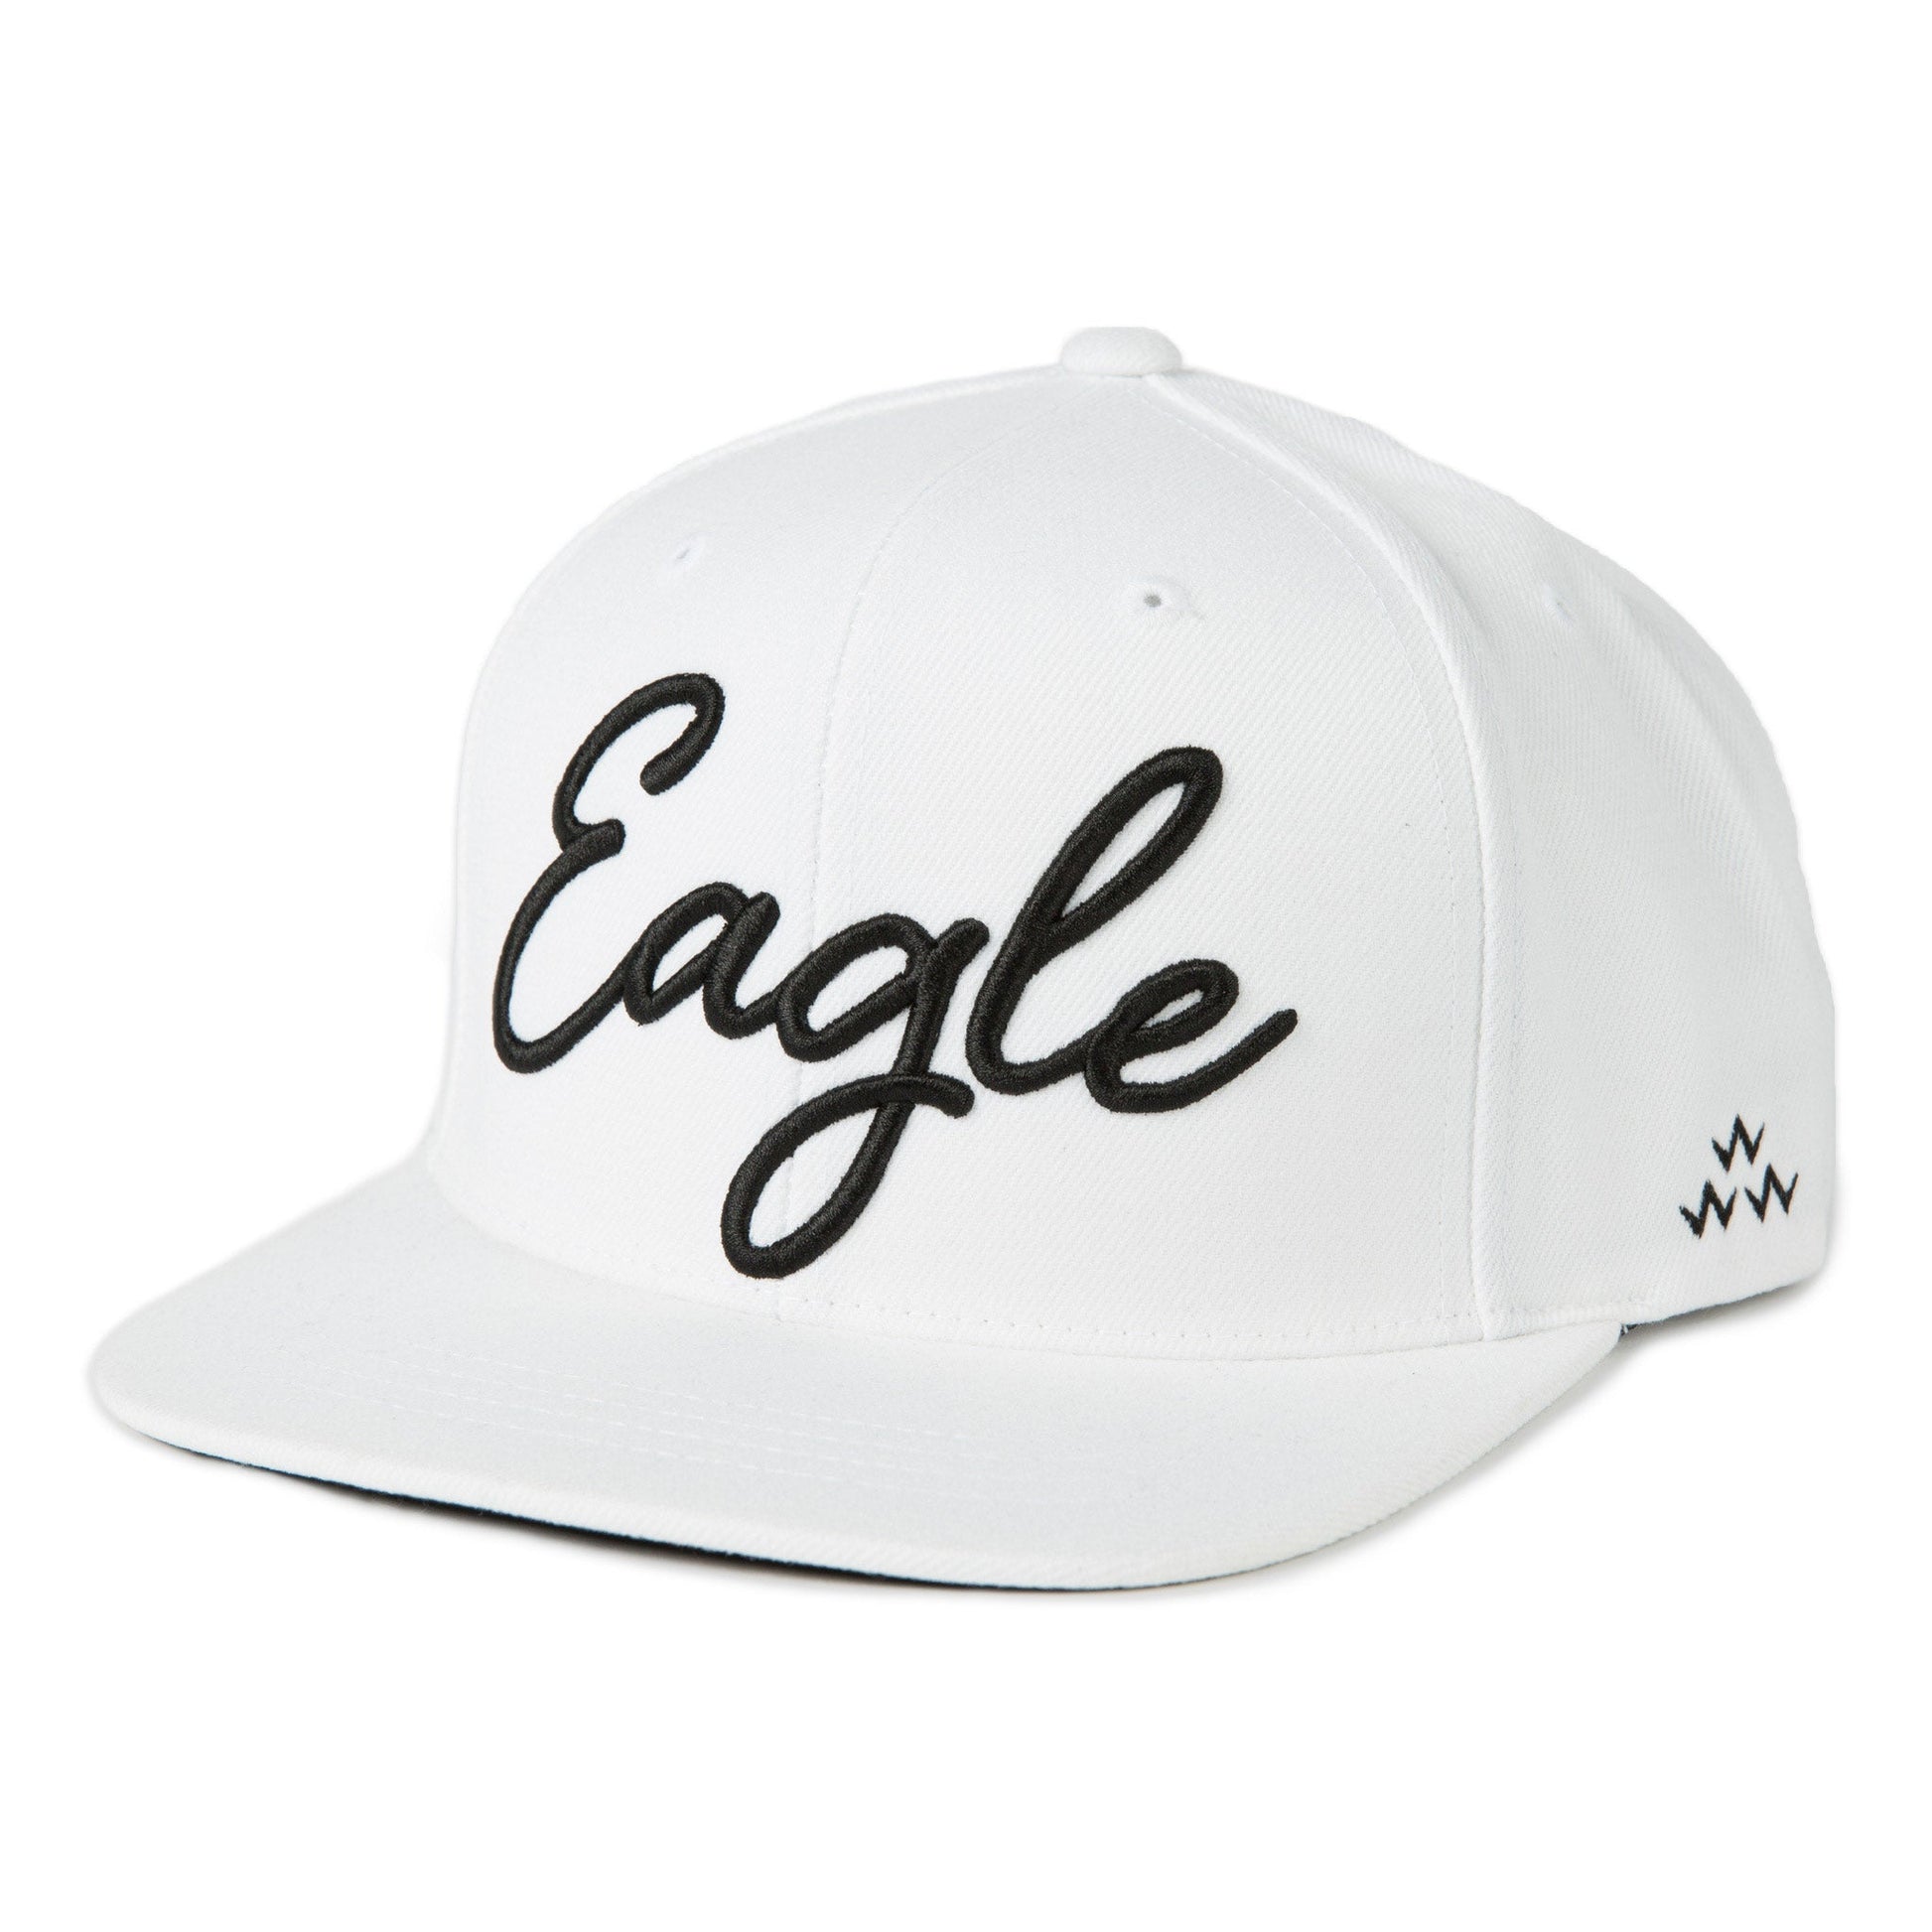 birds-of-condor-white-golf-eagle-snapback-hat-front